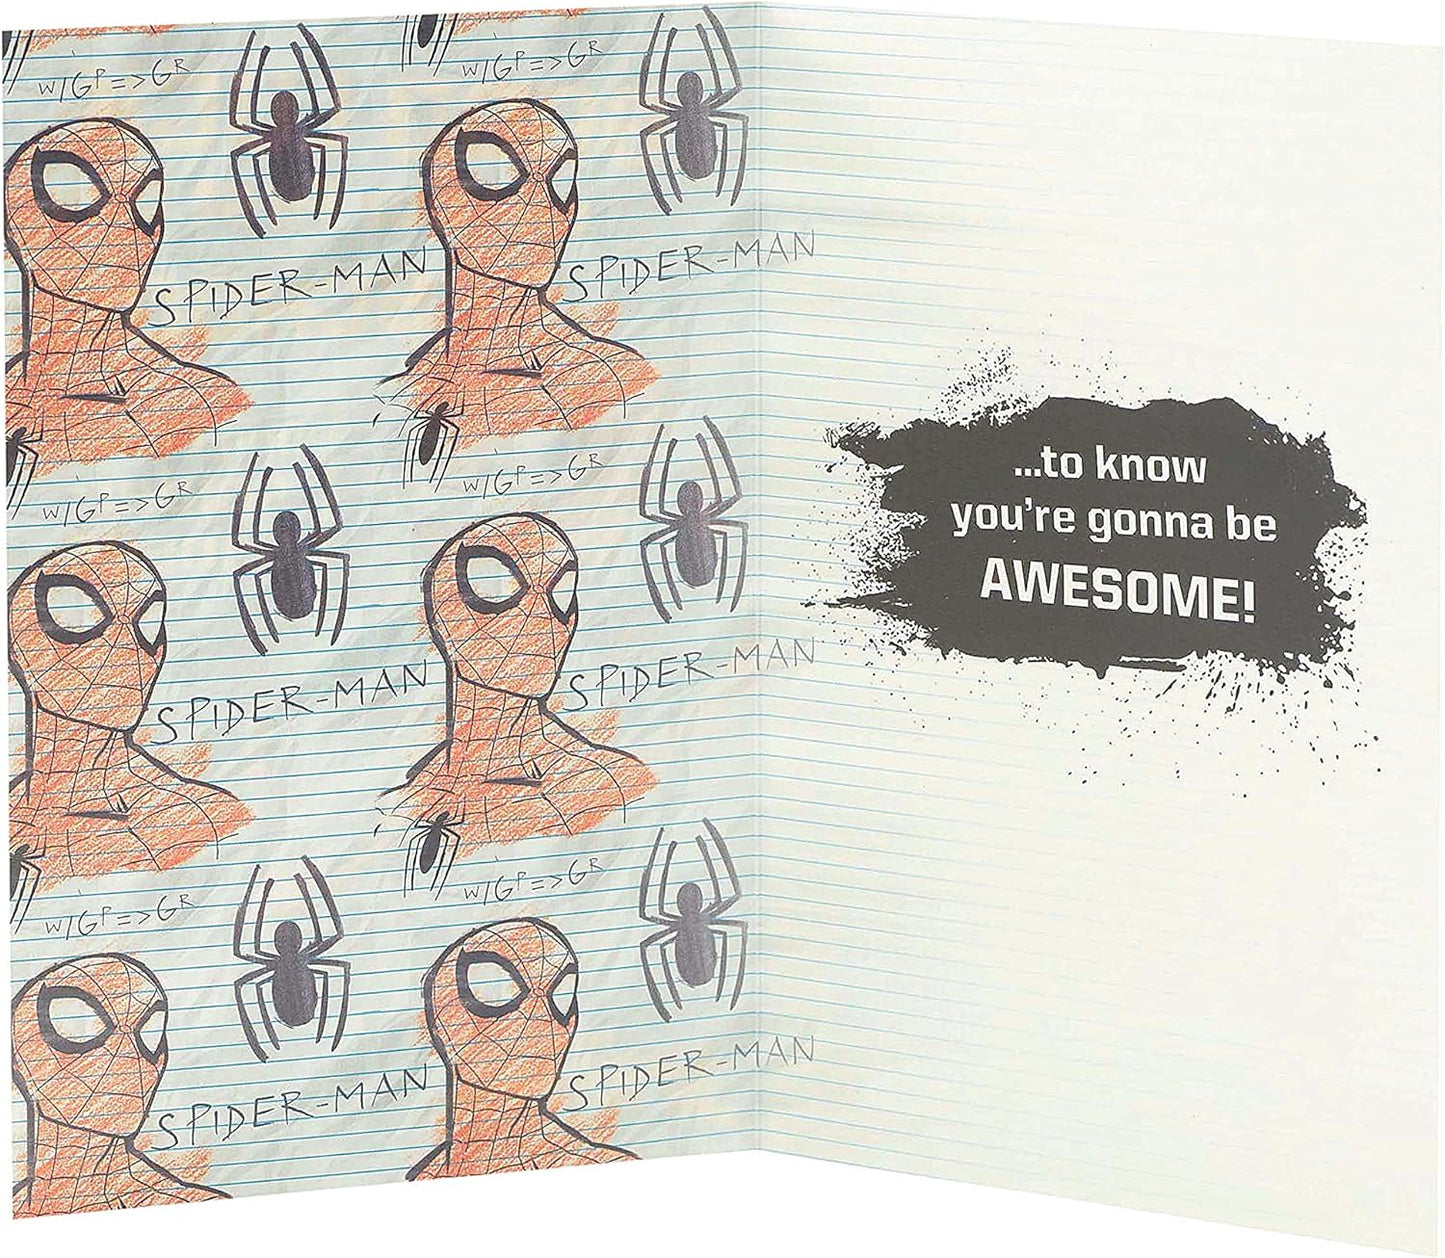 Marvel Spider-Man First Day of New School Card